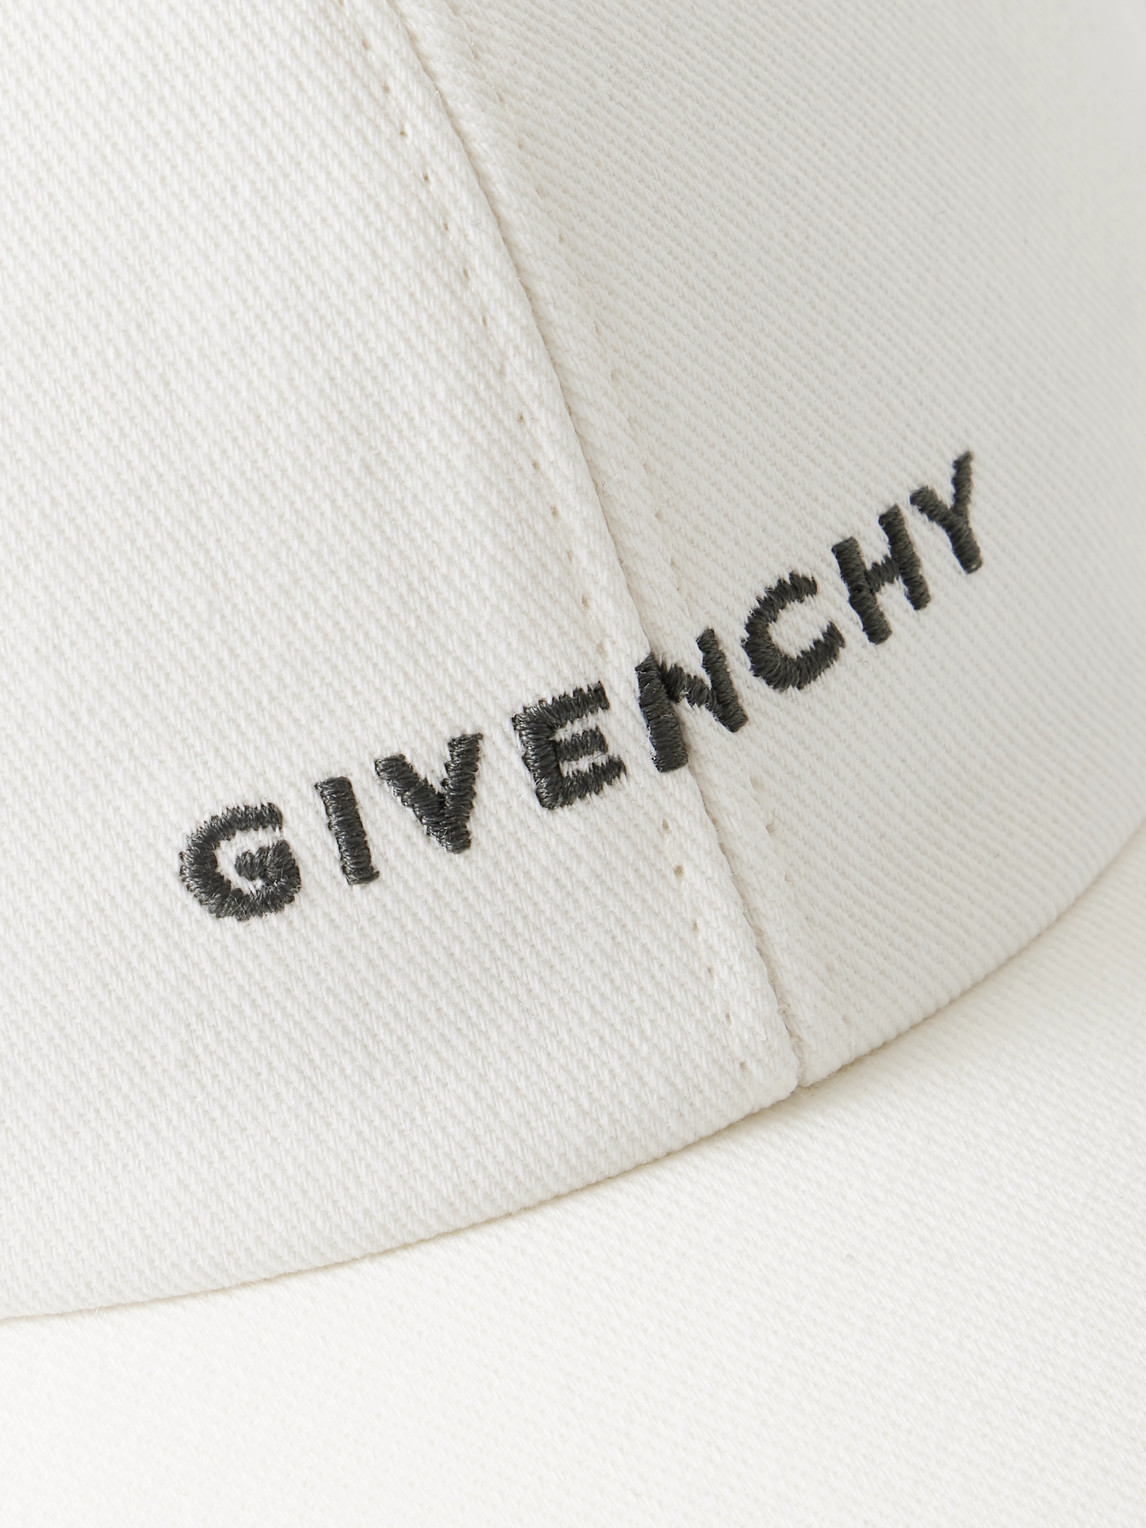 Shop Givenchy Logo-embroidered Cotton-blend Twill Baseball Cap In White